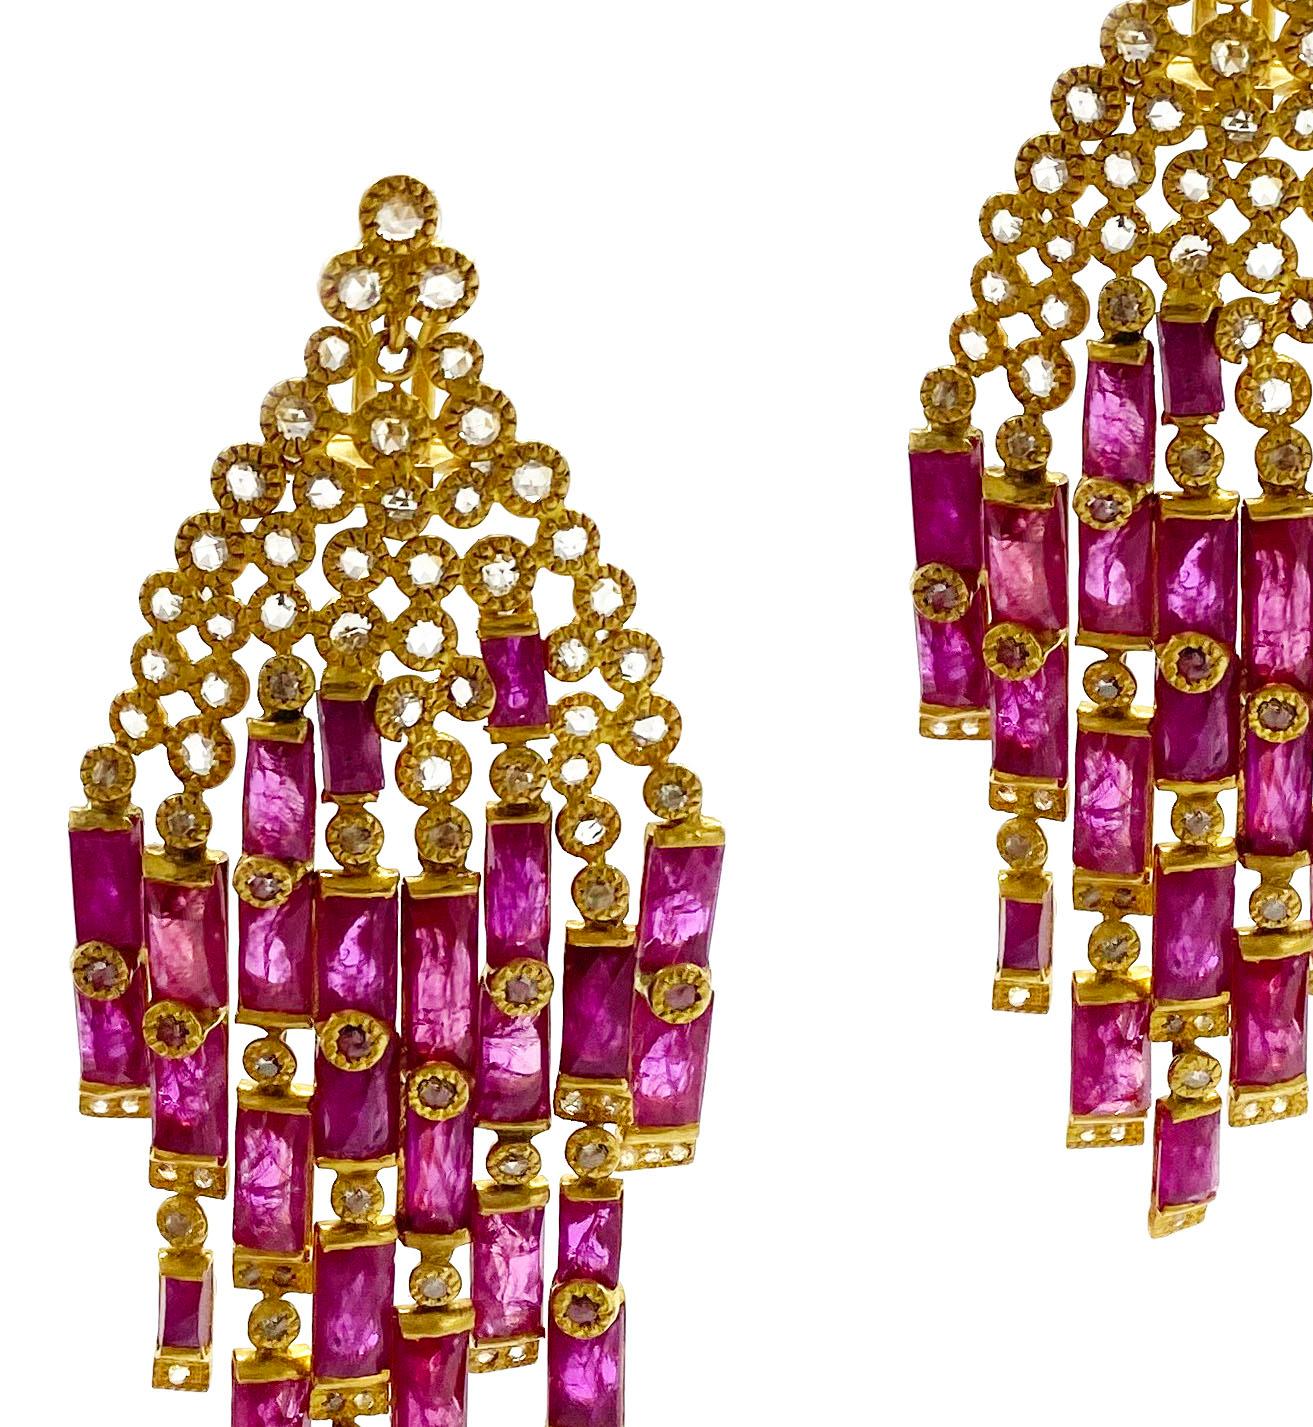 Bold design and Tassel Chandelier statement earrings set in 20 Karat Yellow Gold with Ruby weighing at approximately 31.36cts Ruby and Diamonds 3.84cts, brought to you from the Luminosity collection of Coomi, which consists of bold design and